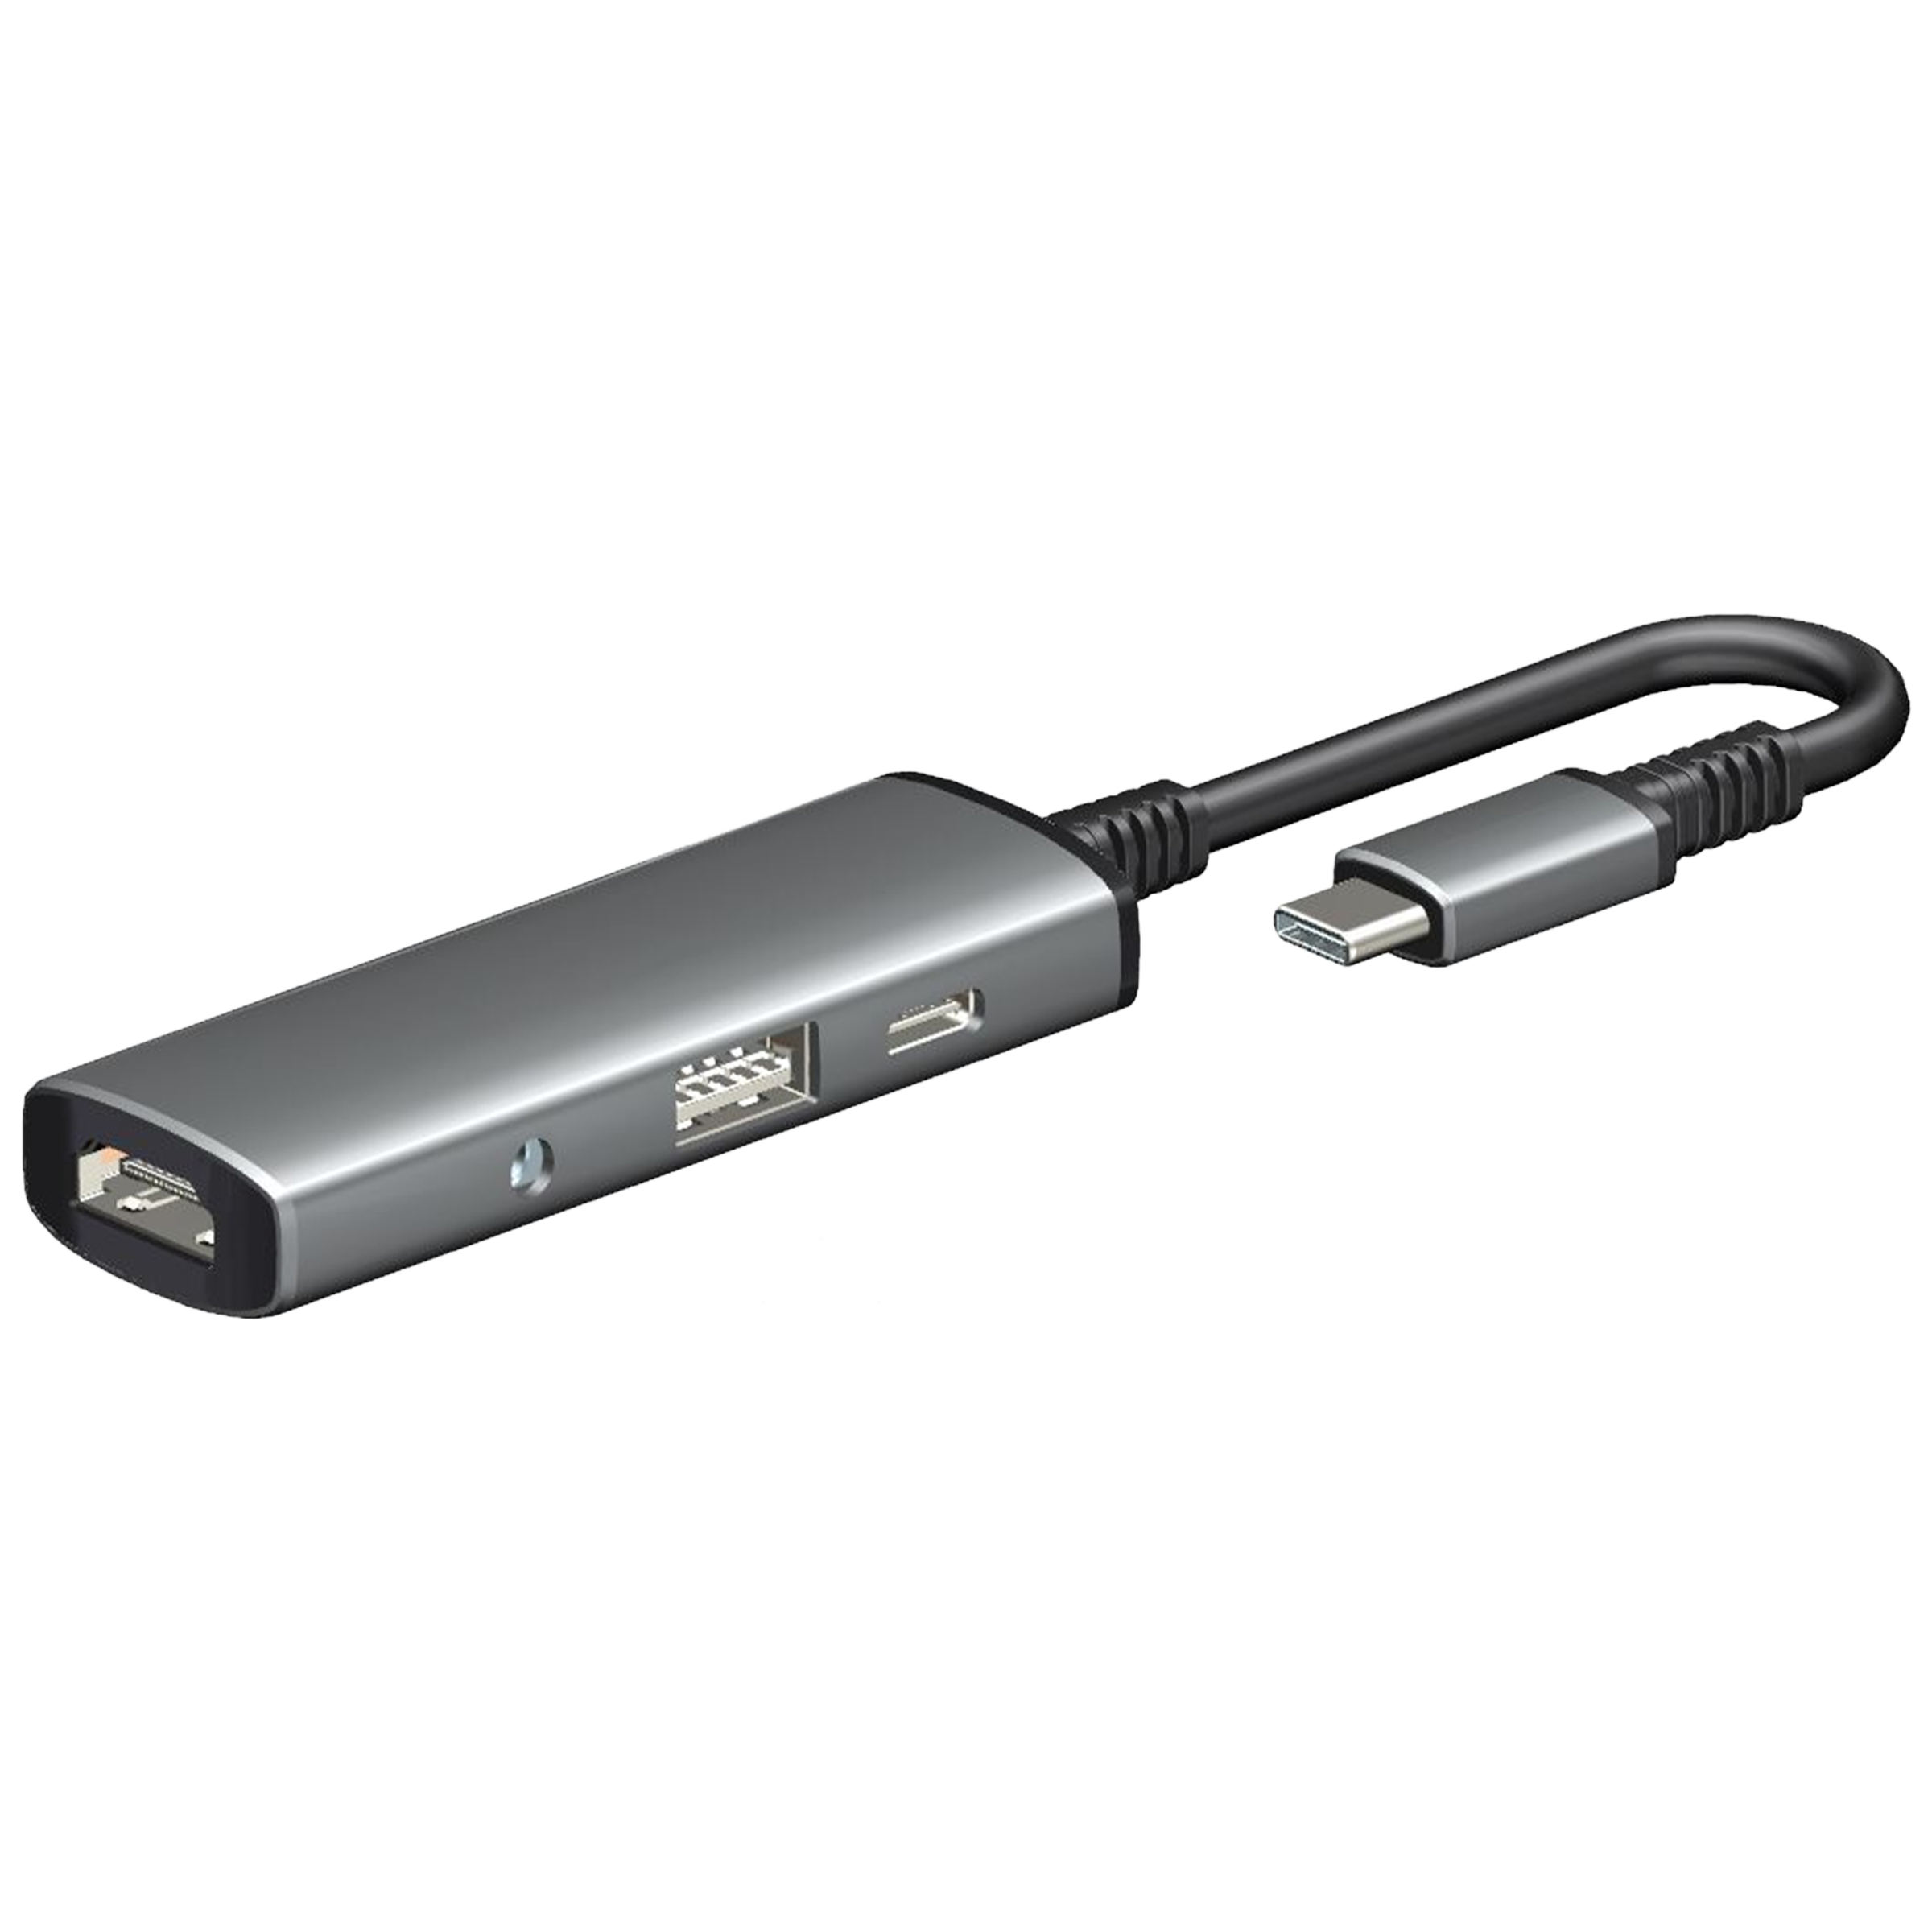 Croma 4-in-1 USB 3.0 (Type-C) to USB 3.0 (Type-A) + 3.5mm Jack + HDMI + USB 3.0 (Type-C) Power/Charging, Data Transfer and Audio & Video Multi-Port Hub (CRSP4I1ACA010701, Grey)_1